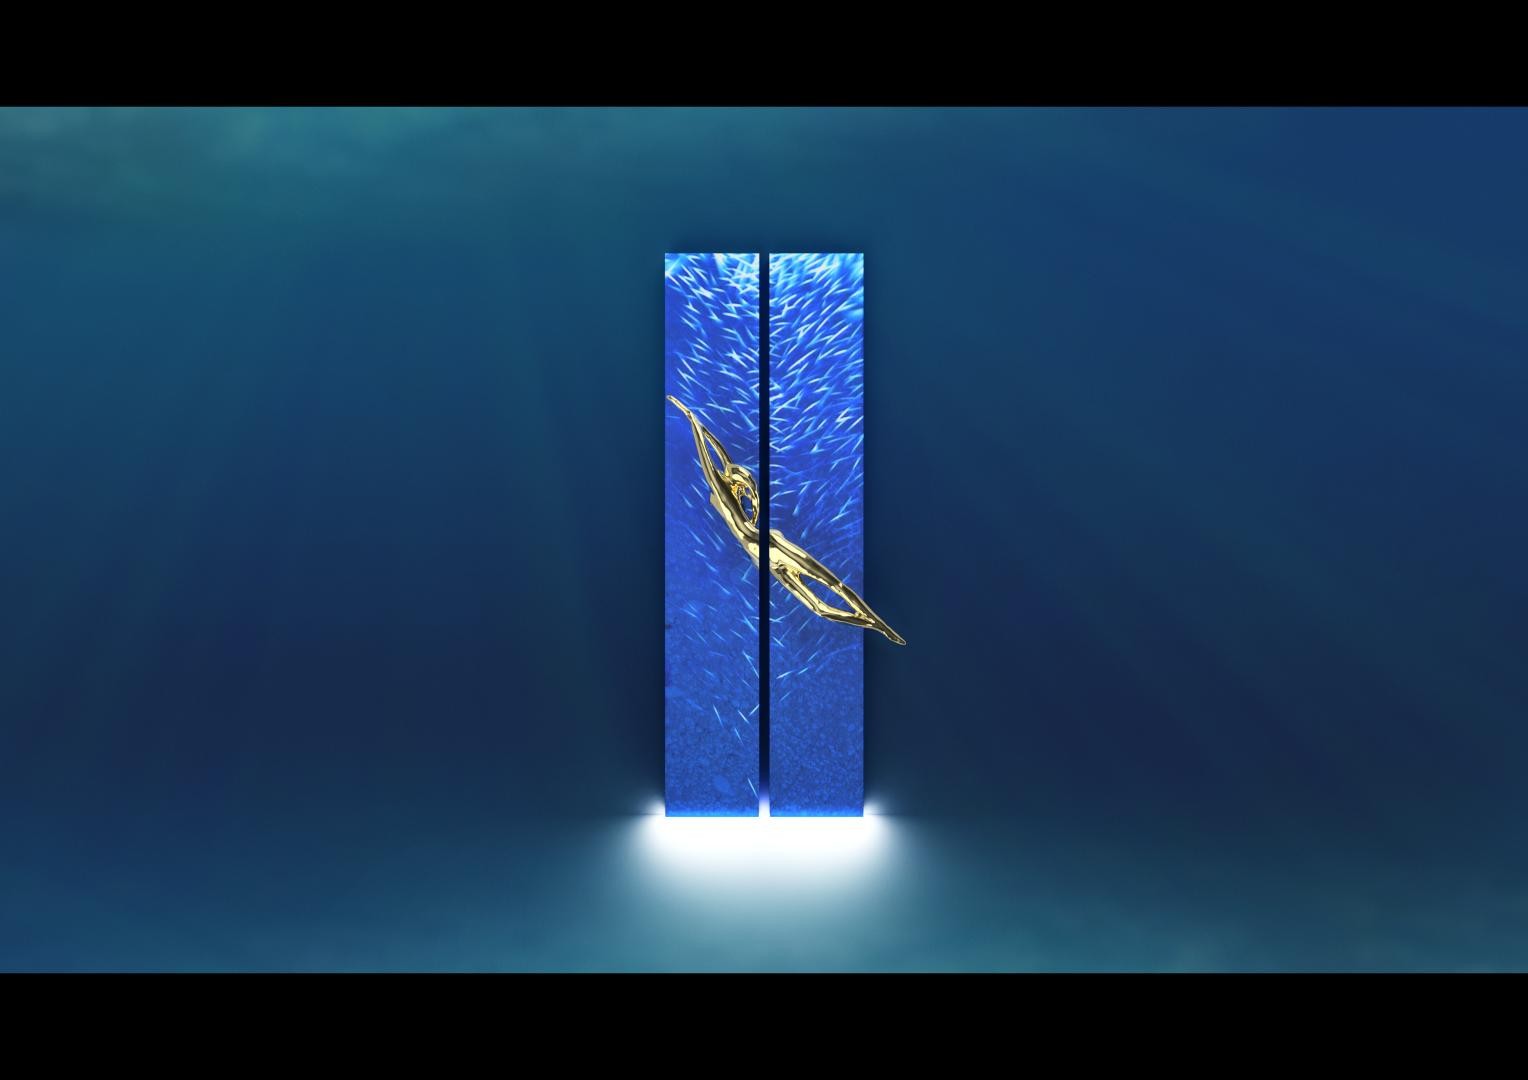 Diver in a School of Anchovies